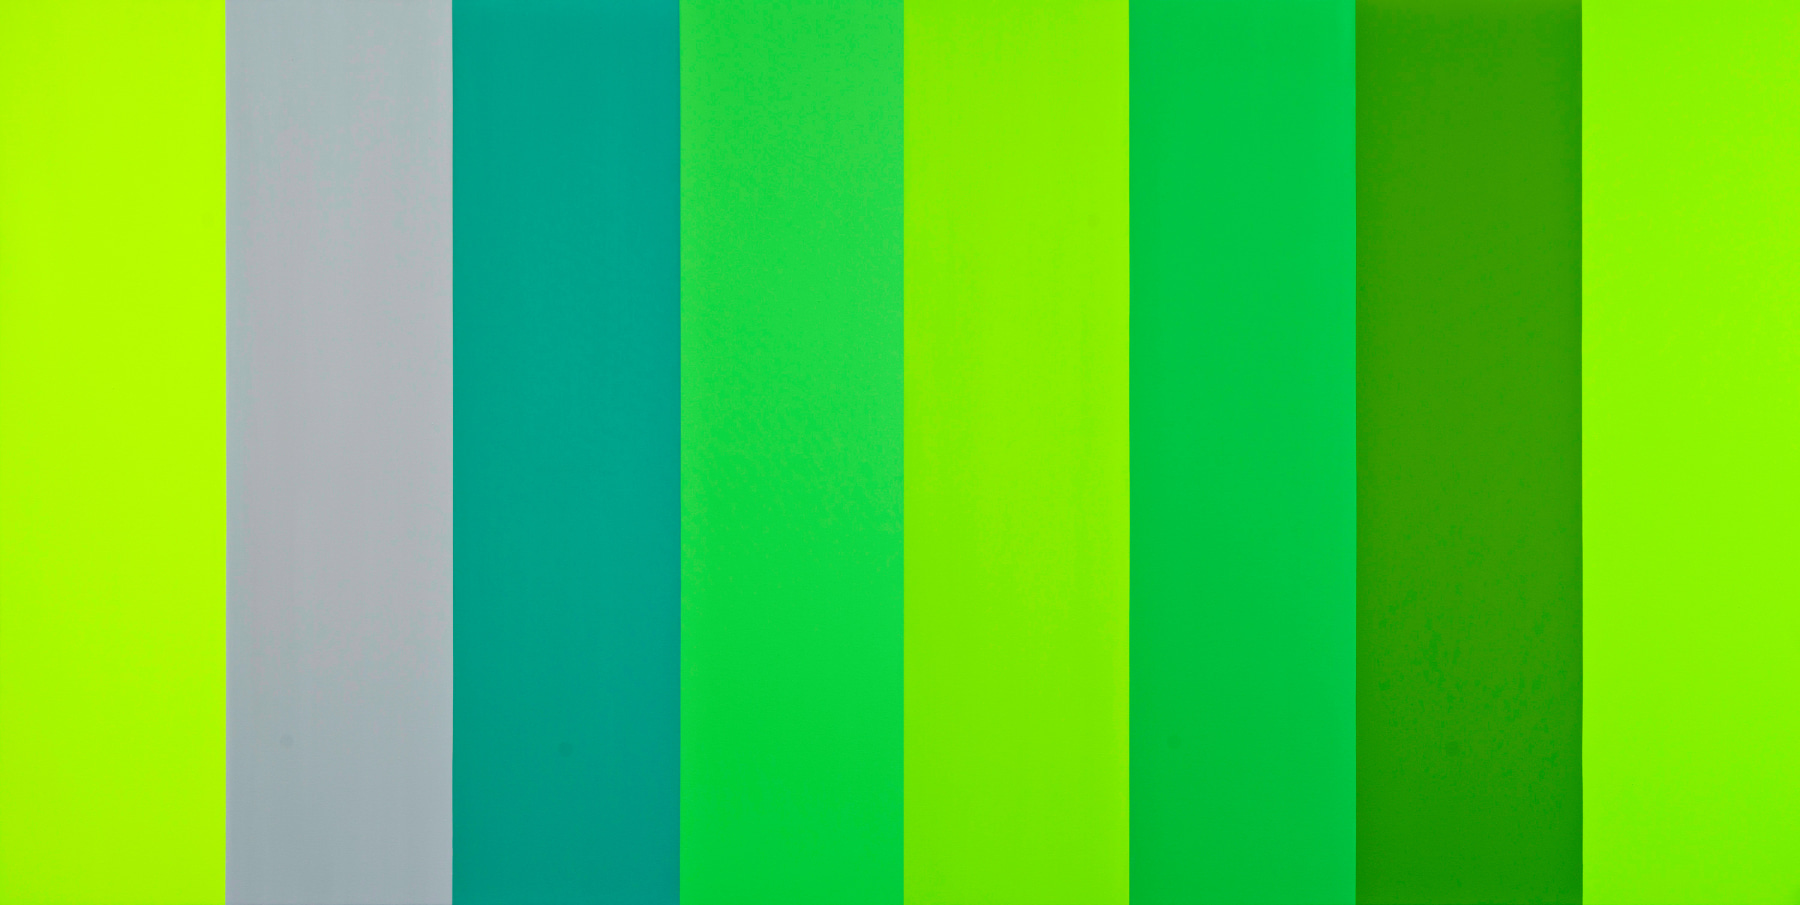 Untitled (P13-01) diptych

2013

Oil on canvas

72 x 144 inches

182.9 x 365.8 cm